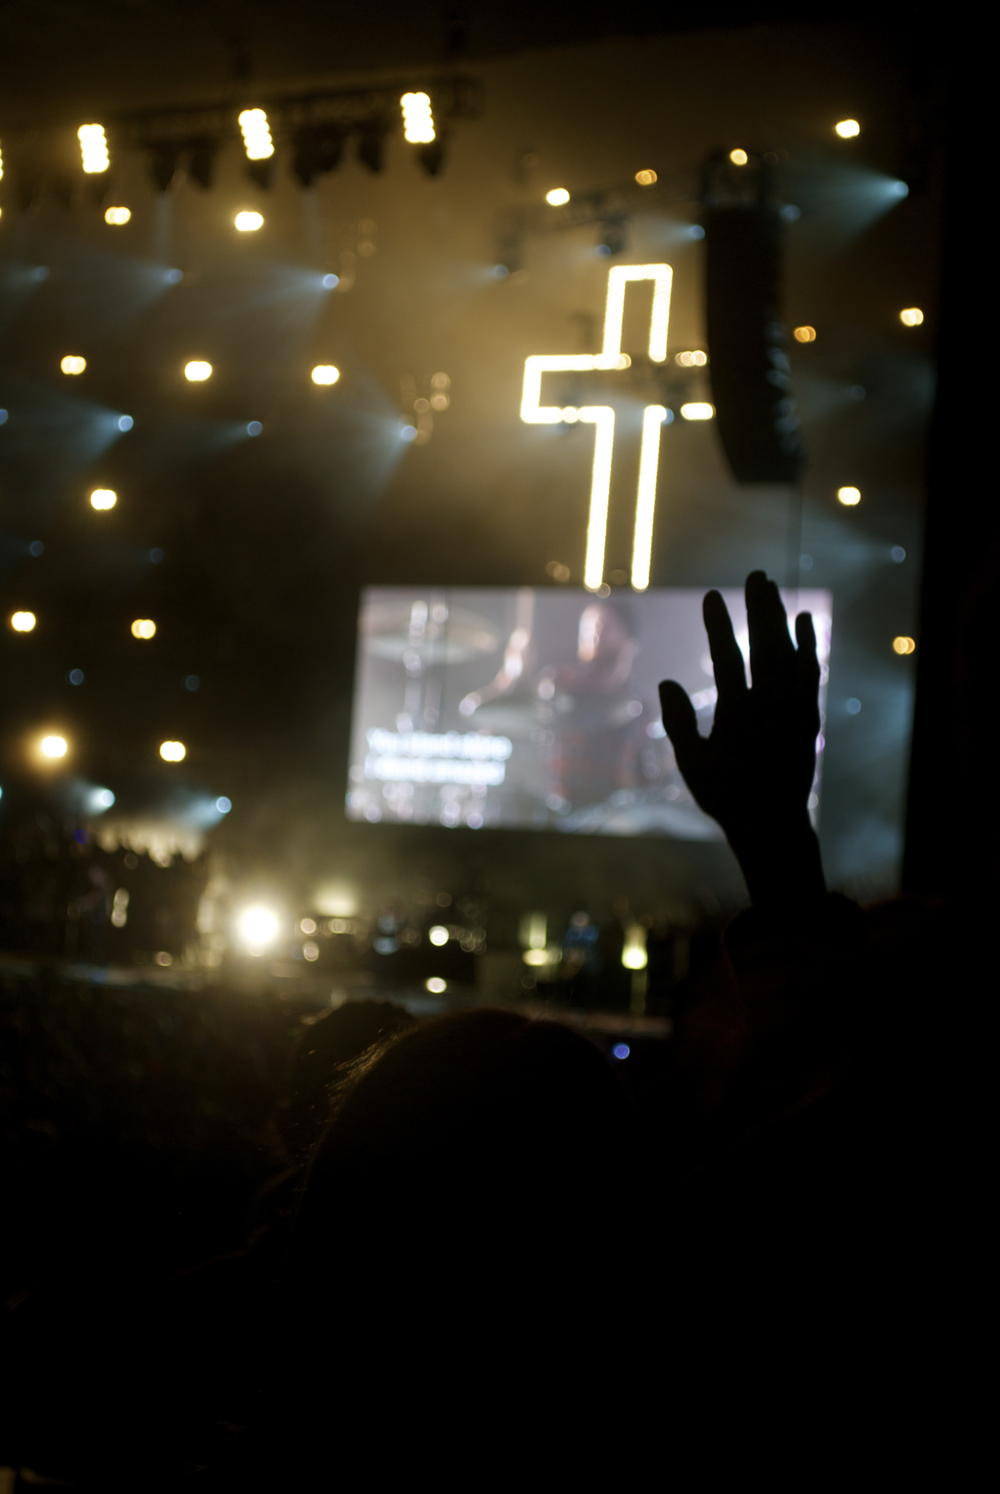 The Good Friday concert hosted by Passion City Church every Easter weekend.